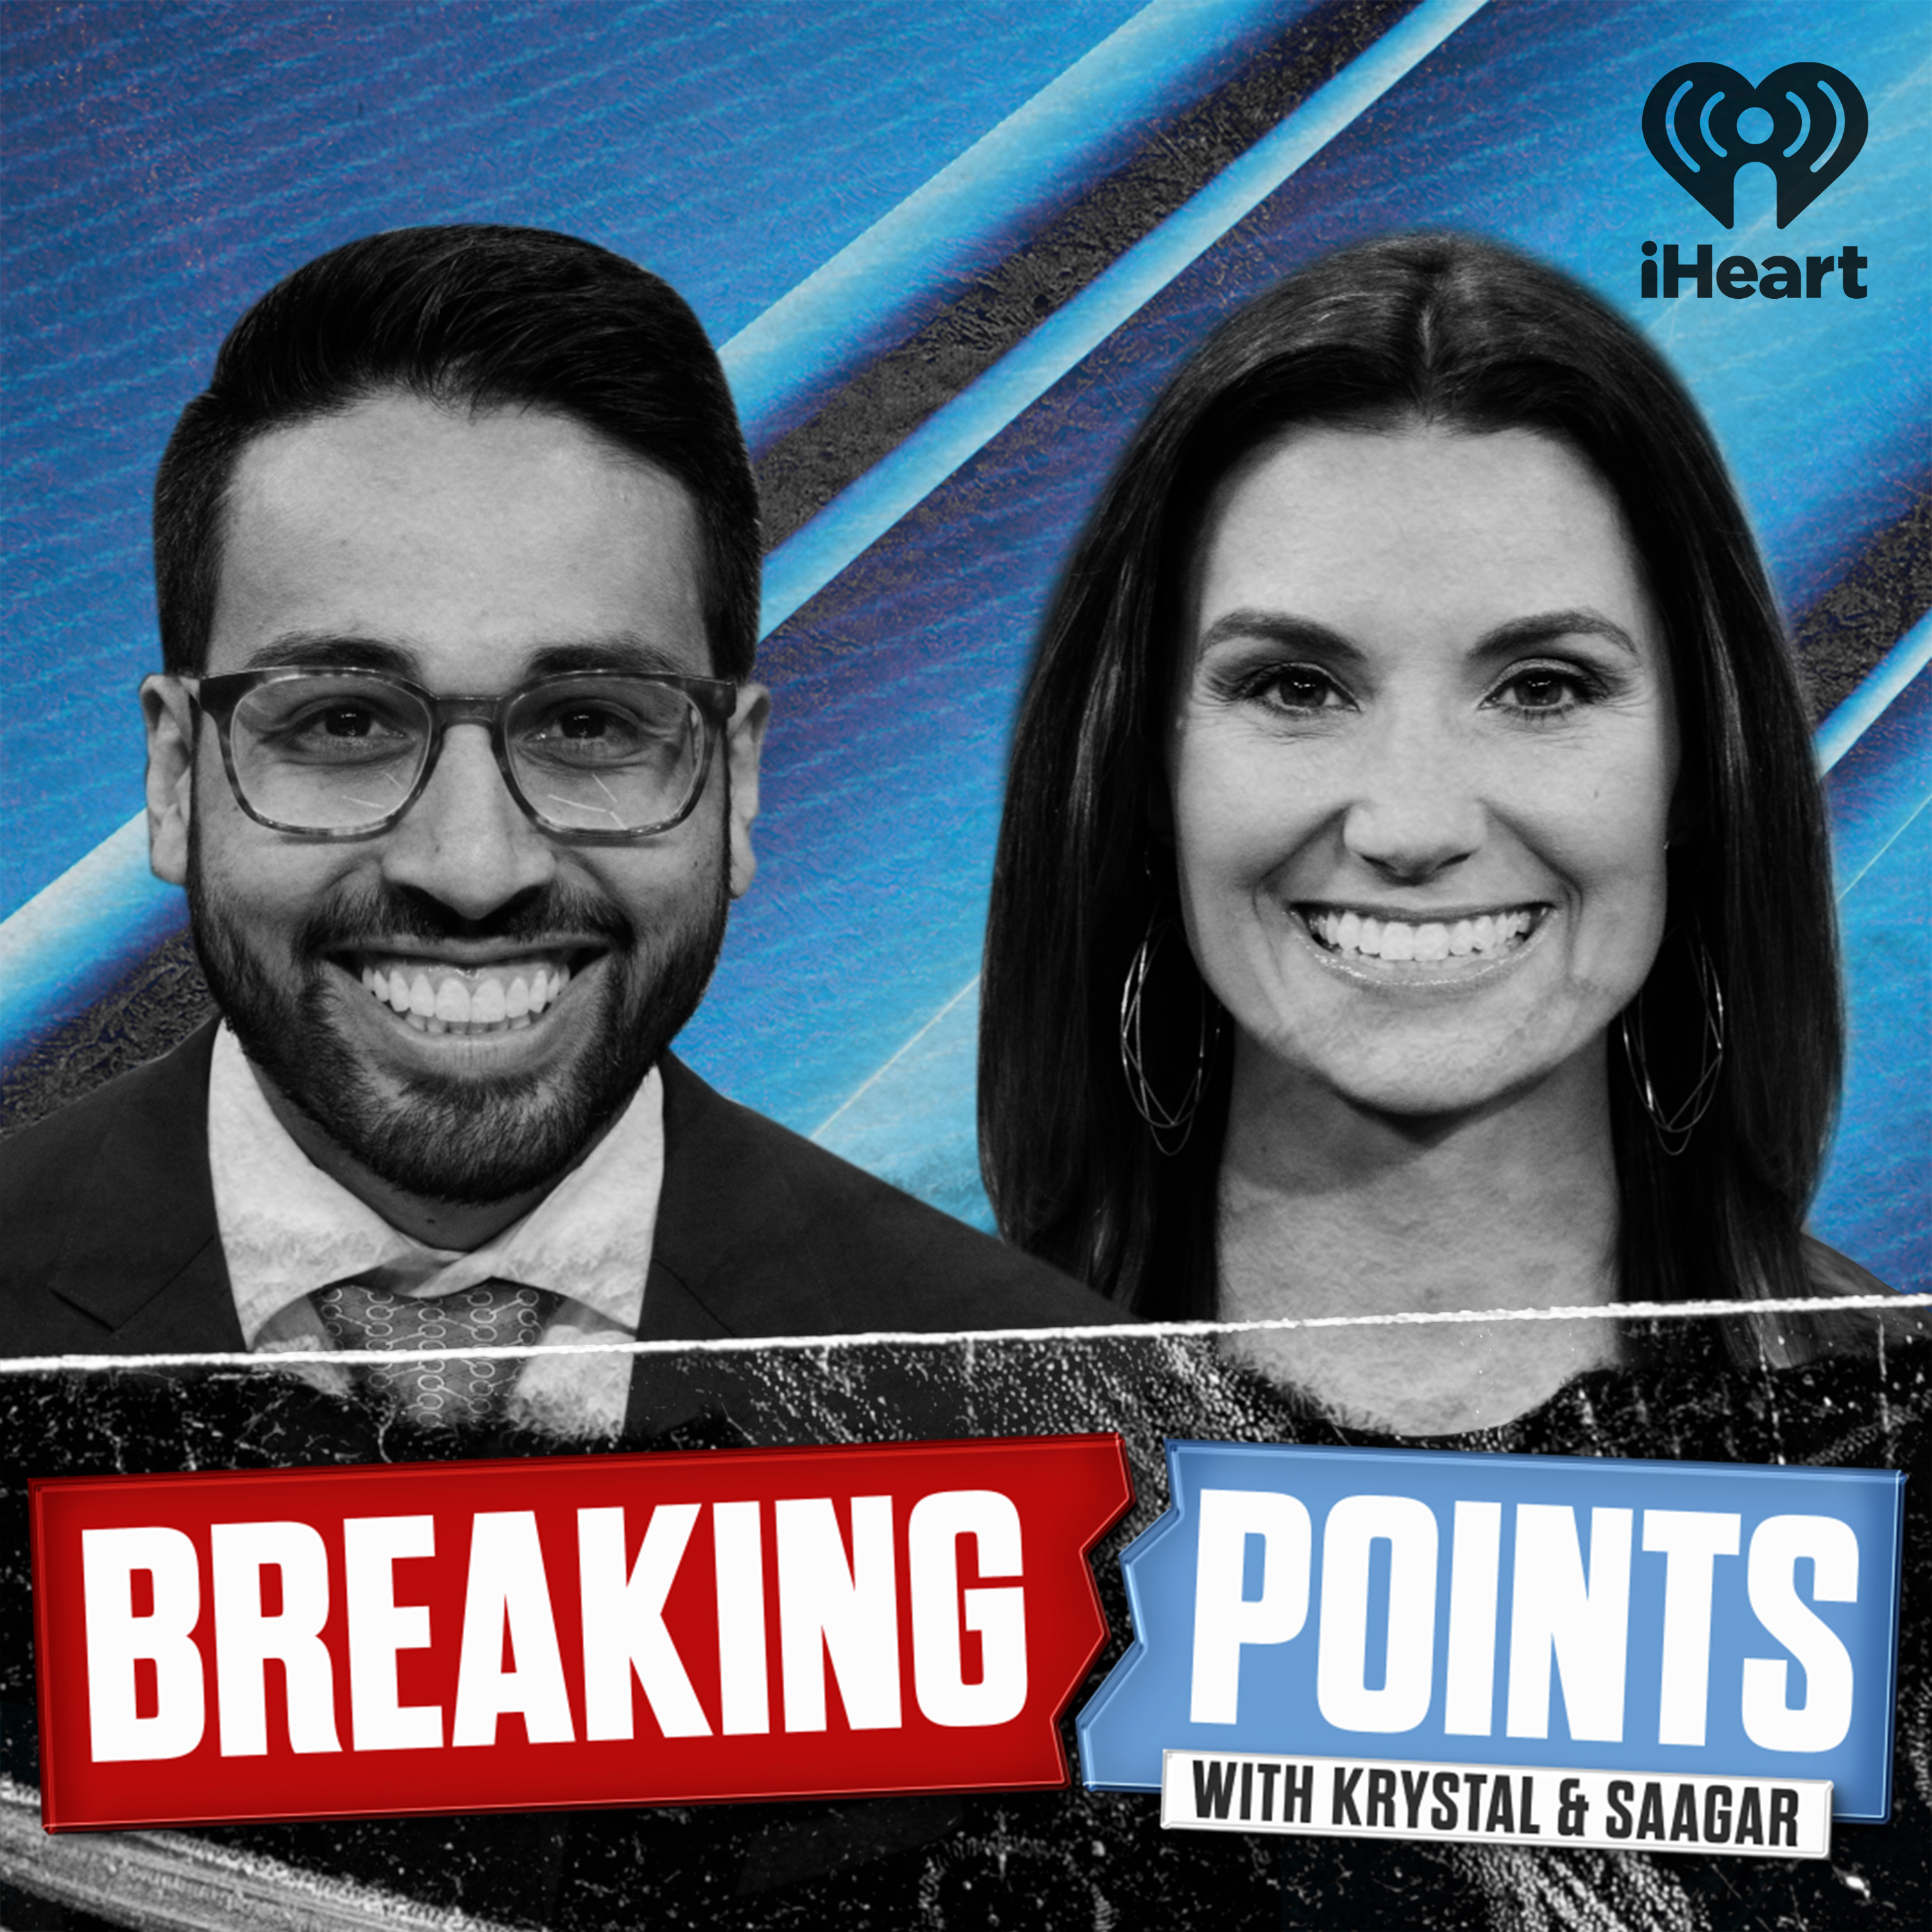 7/19/21: Biden Pressuring Facebook, CNN Humiliation, Lab Leak, Delta Variant, Caitlyn Jenner, Inflation Deepdive, Climate Disaster, Right to Repair, and More!